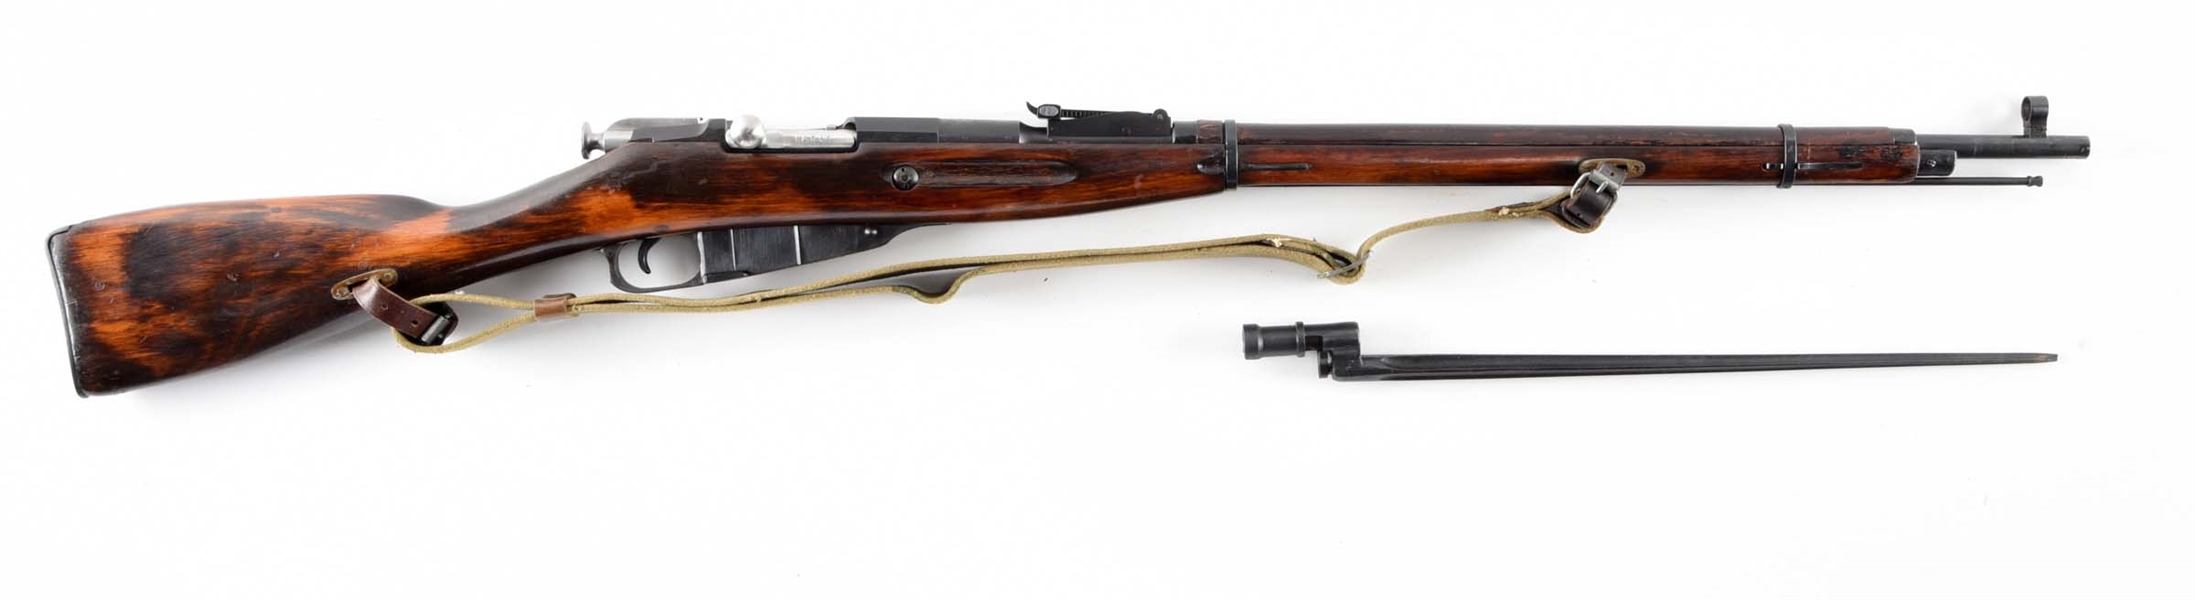 (C) HEX RECEIVER TULA M91/30 BOLT ACTION RIFLE WITH BAYONET.